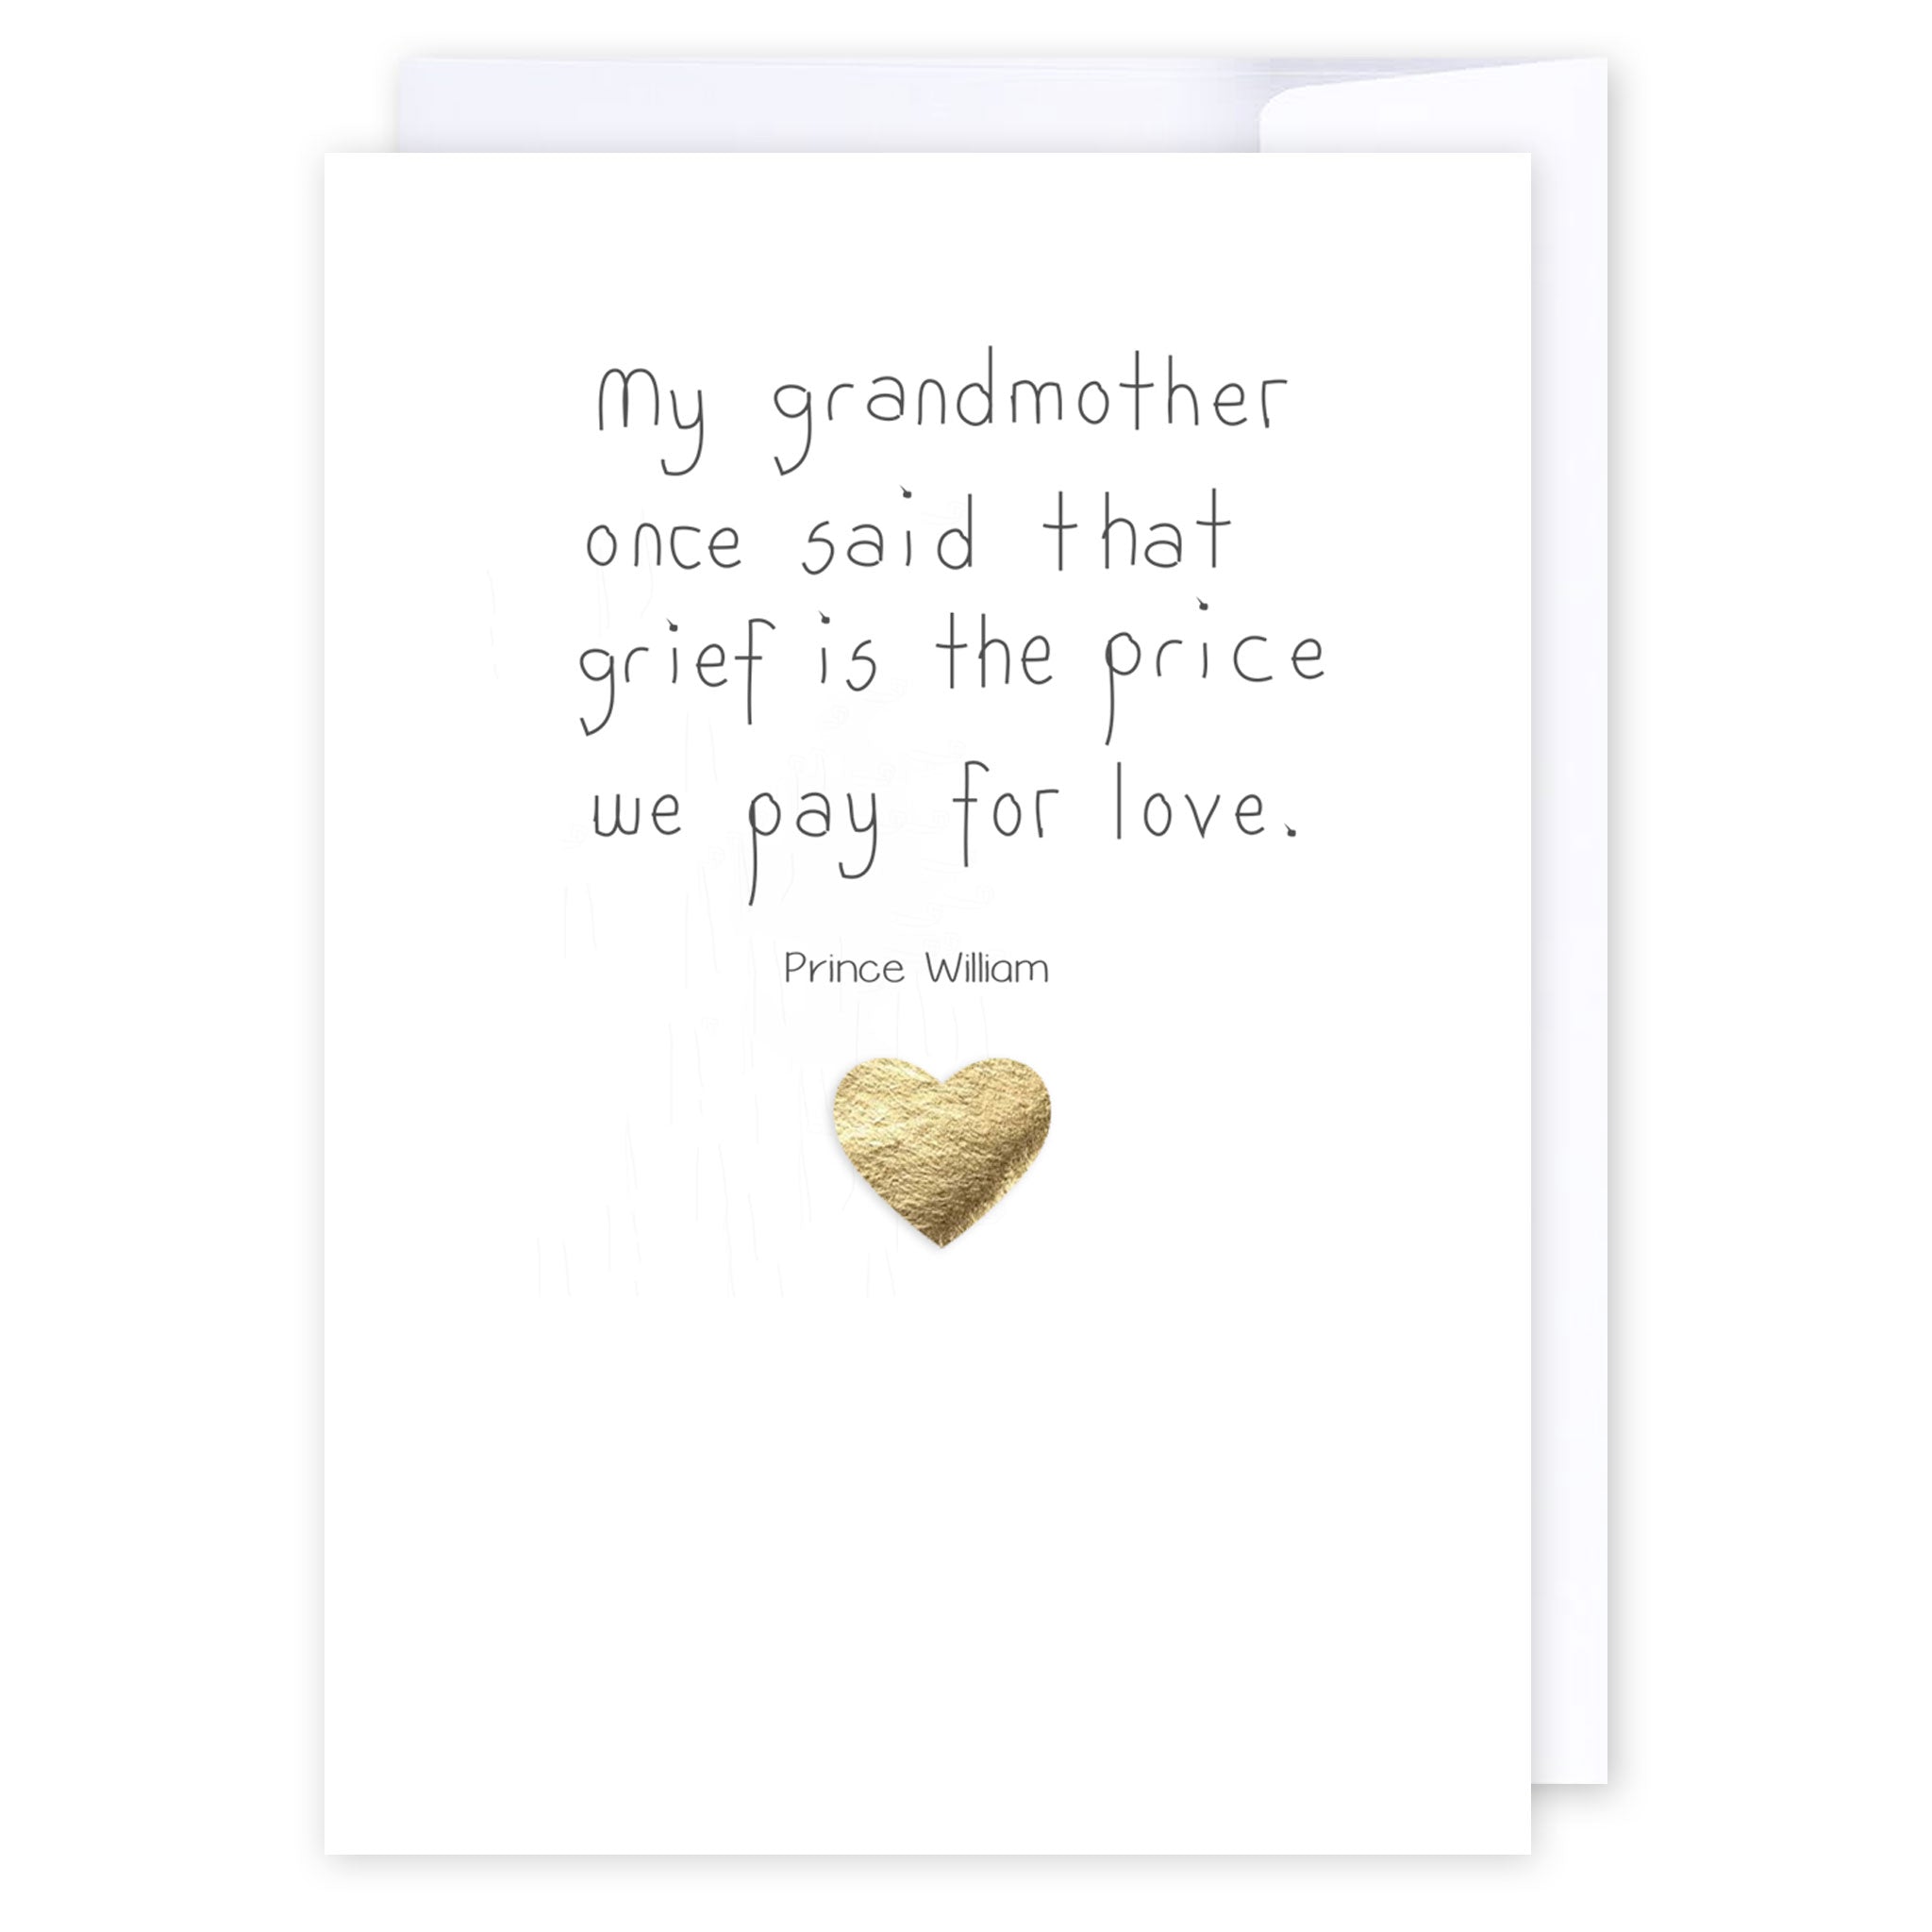 Grief and love